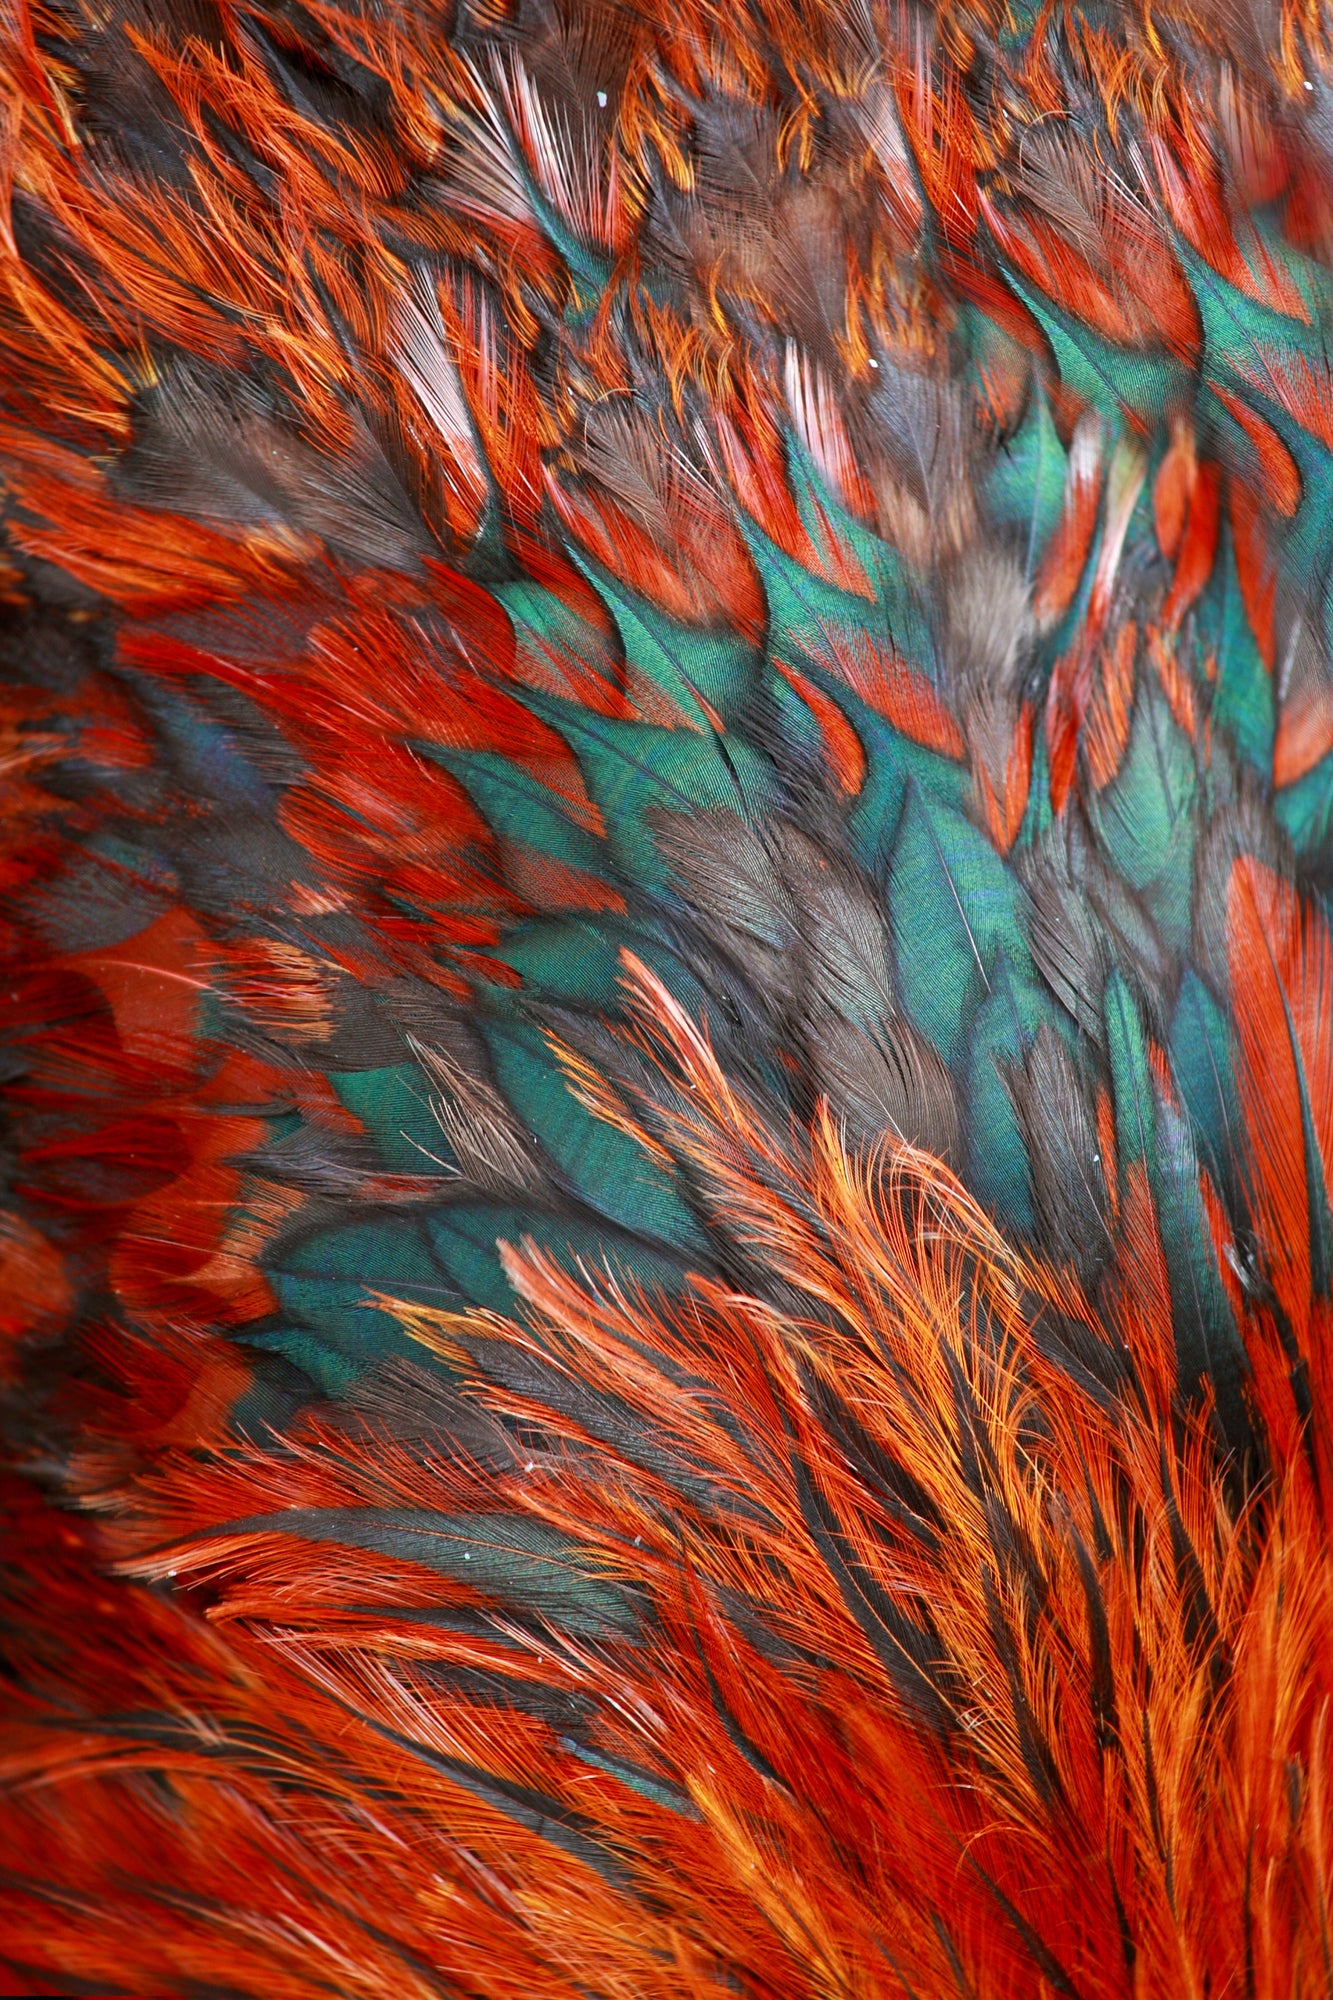 Colorful Bird Feathers Photograph Home Decor Premium Quality Poster Print Choose Your Sizes